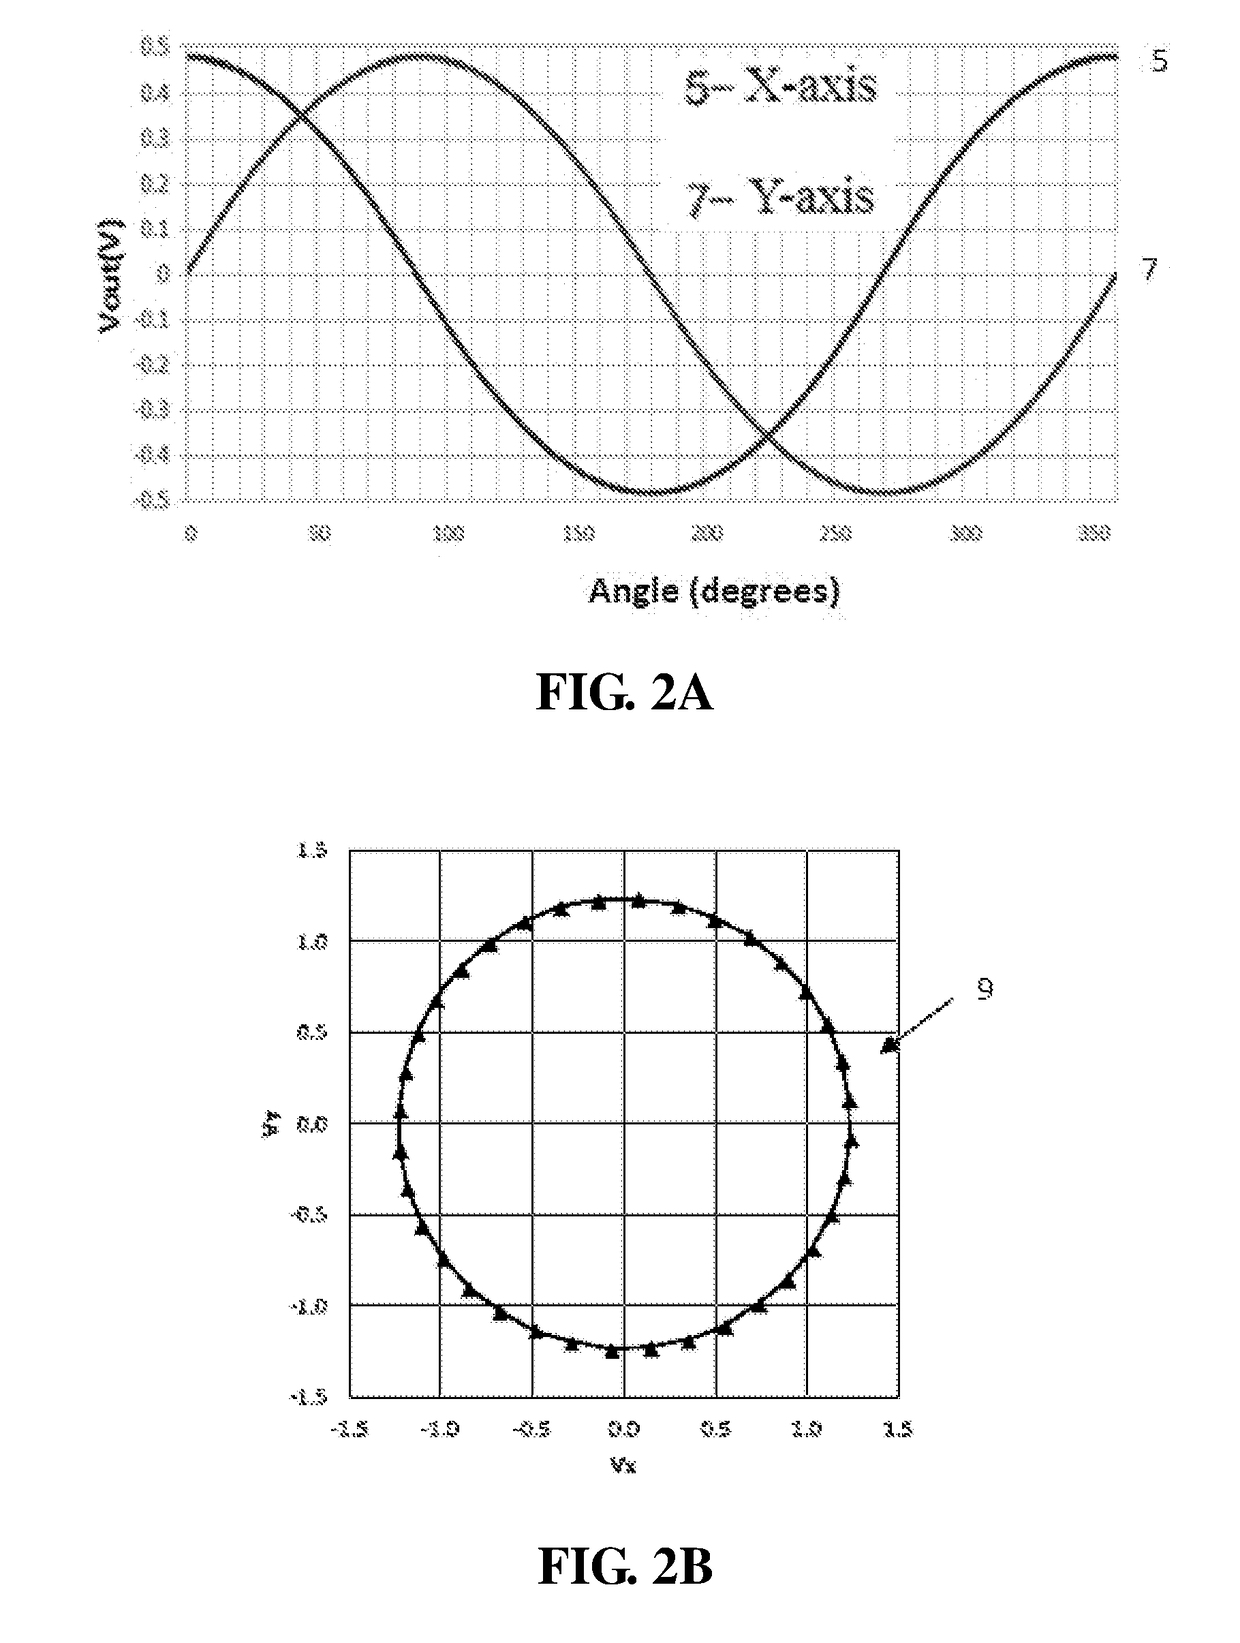 Magnetoresistive angle sensor and corresponding strong magnetic field error correction and calibration methods